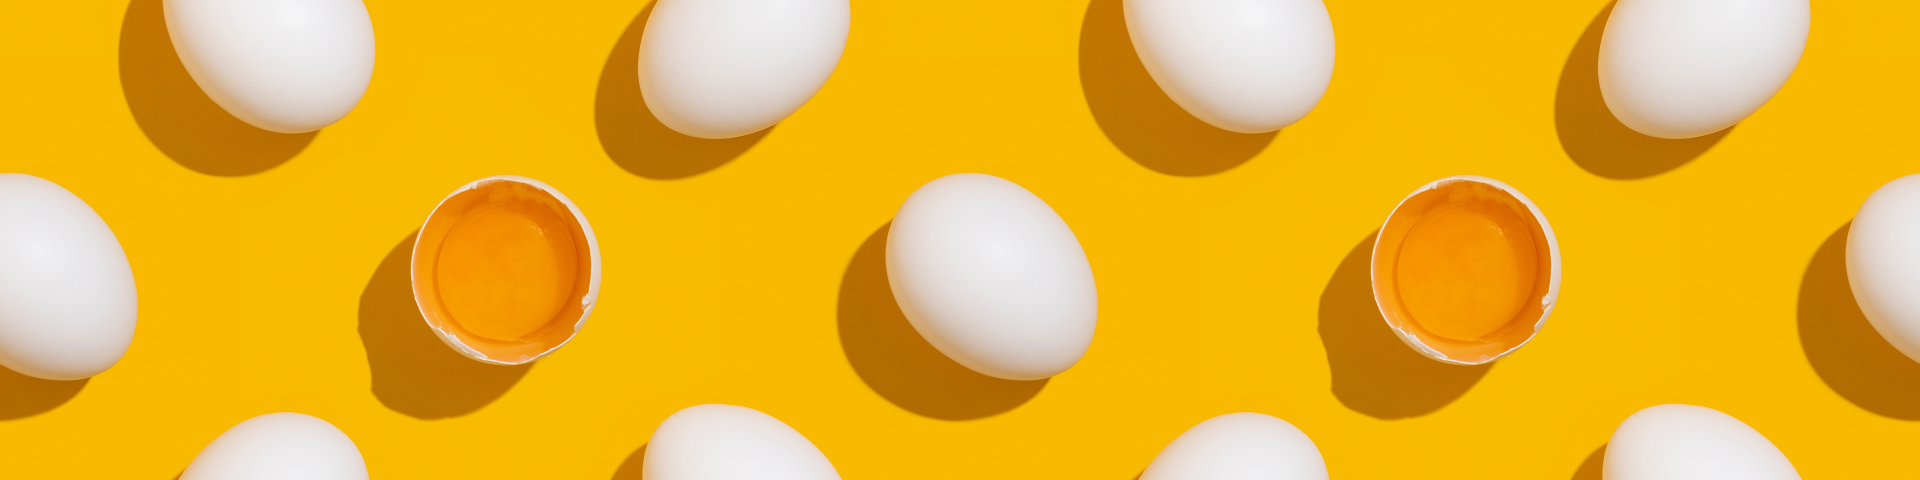 Eggs scattered on a yellow background.